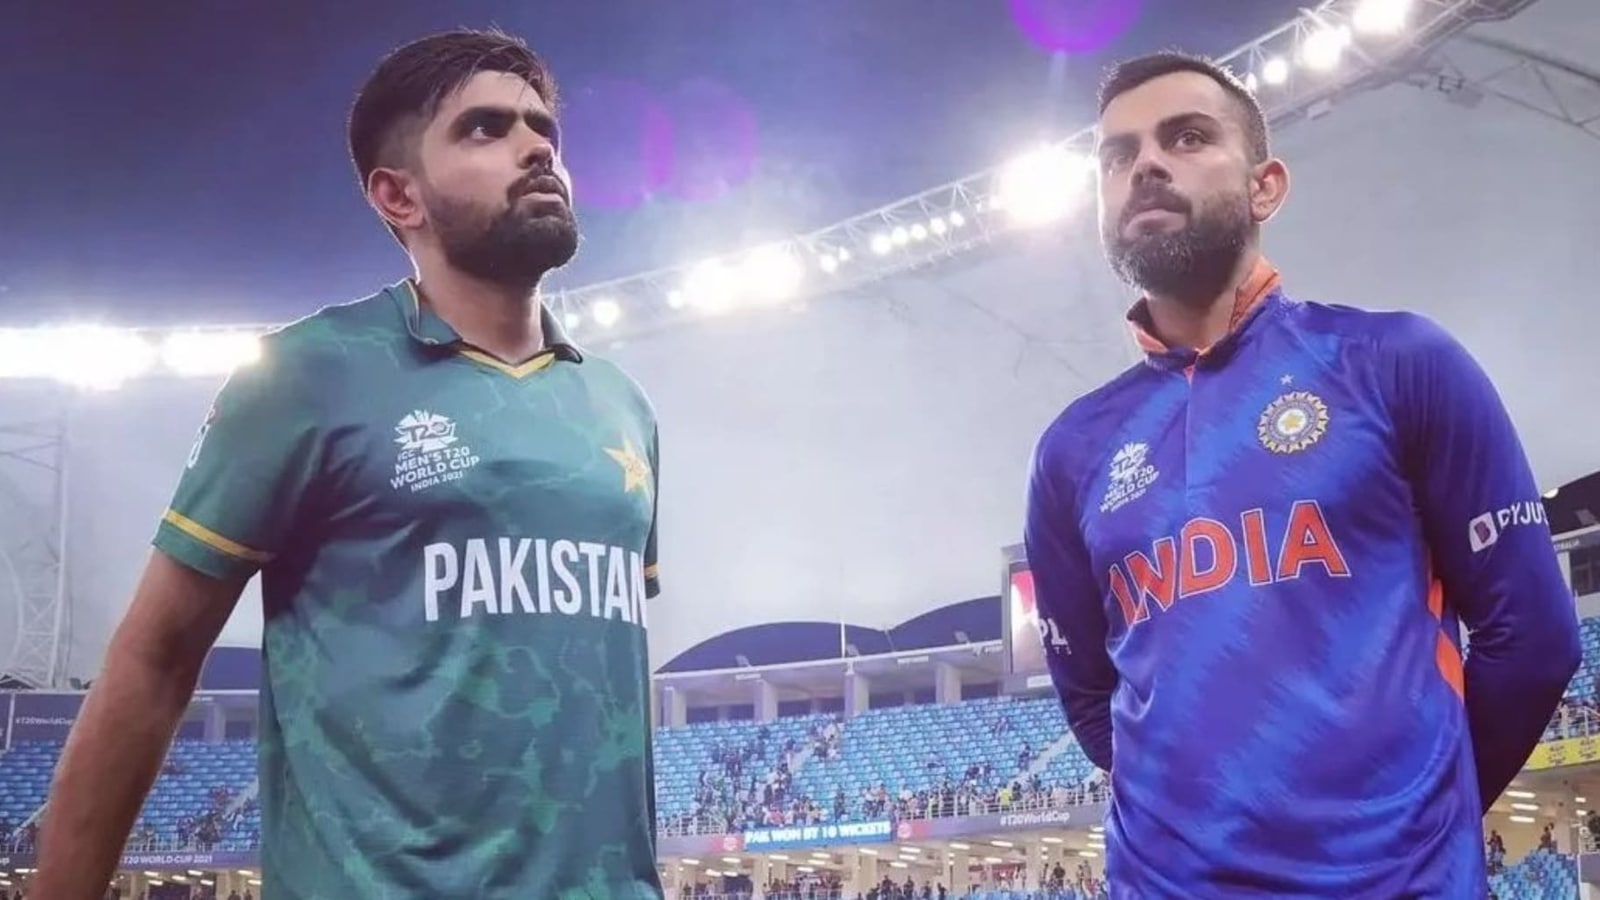 from-virat-kohli-to-babar-azam-five-players-to-watch-out-for-in-india-vs-pakistan-asia-cup-2022-clash